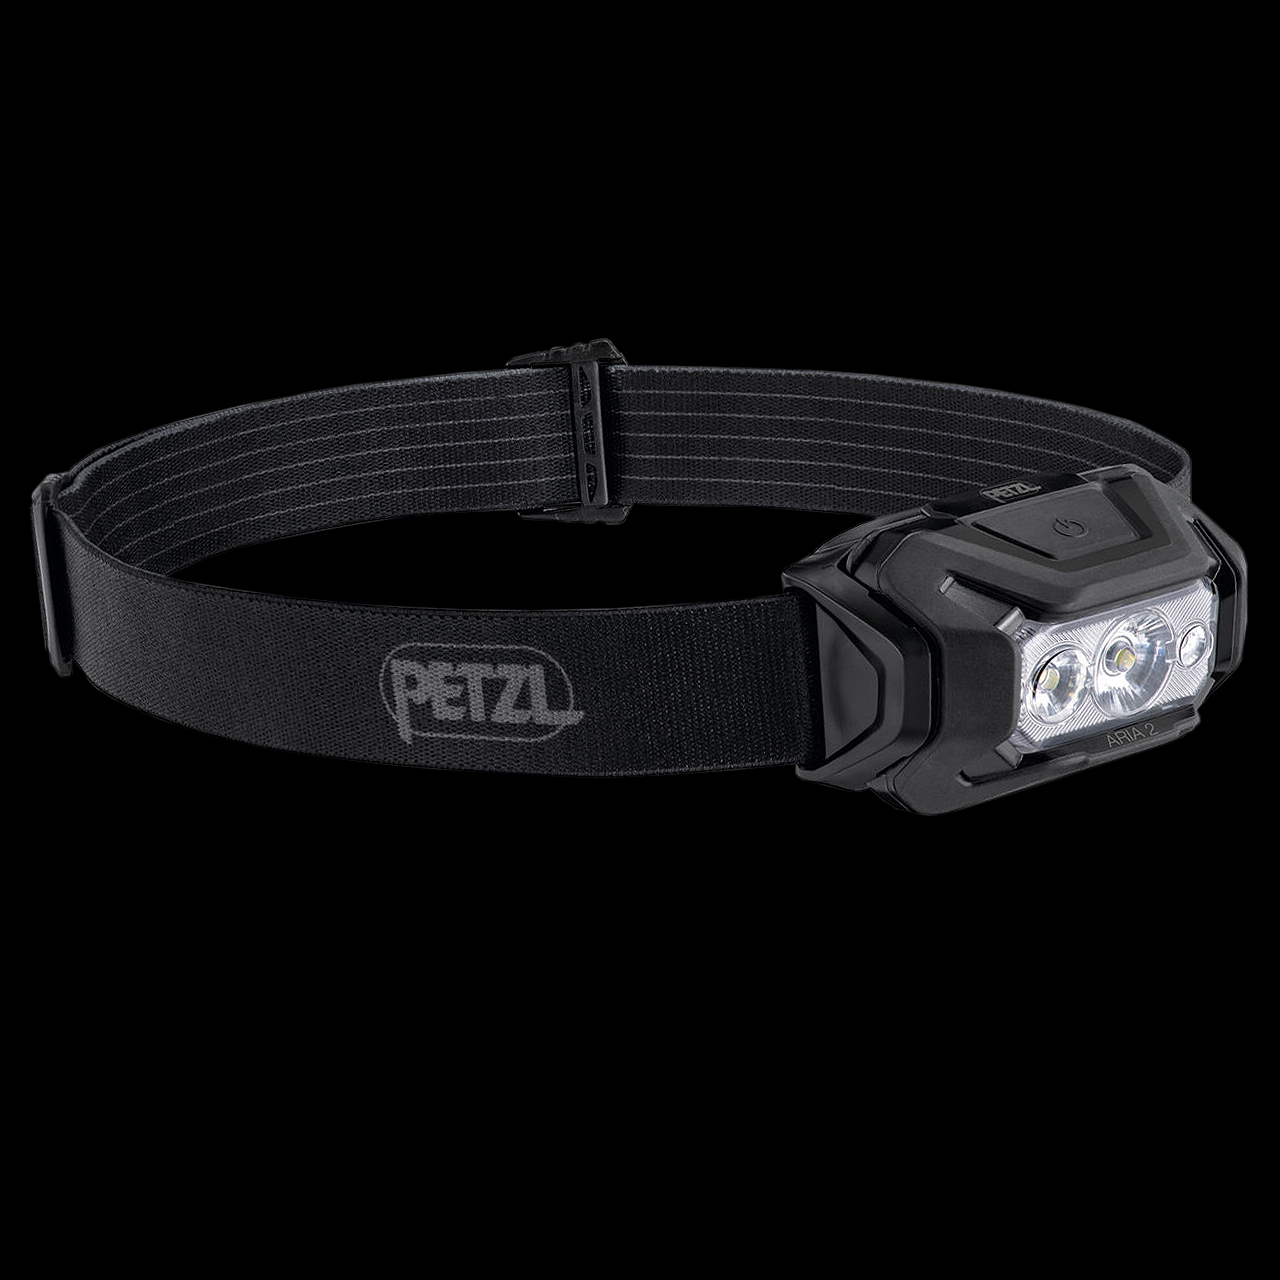 Petzl Aria 2 RGB headtorch tested and reviewed - Yachting World